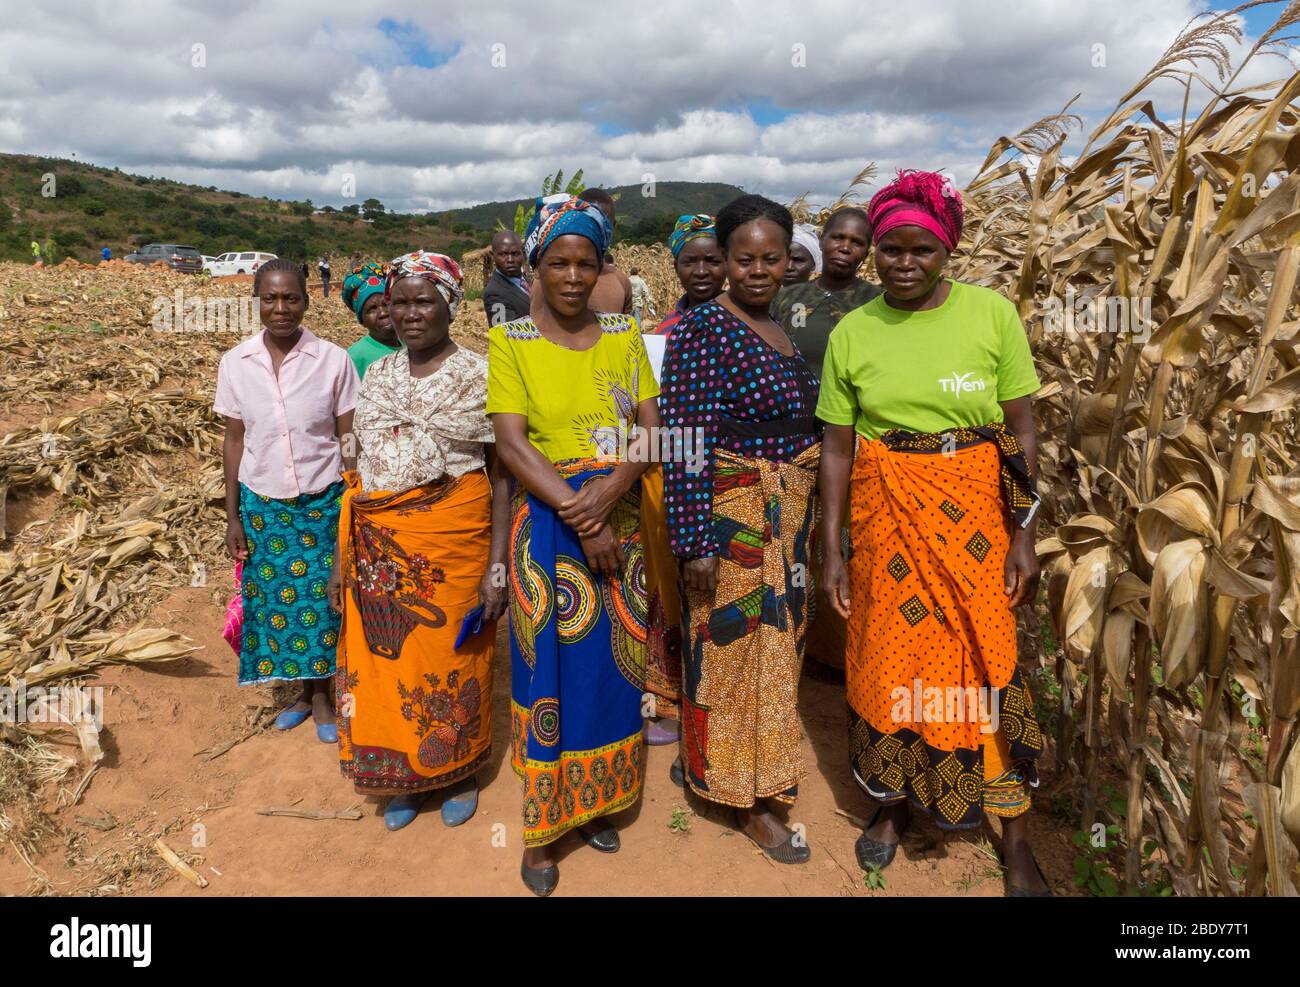 A group of women farmers stand by their harvested maize fields in Malawi (sustainable conservation agriculture) Stock Photo